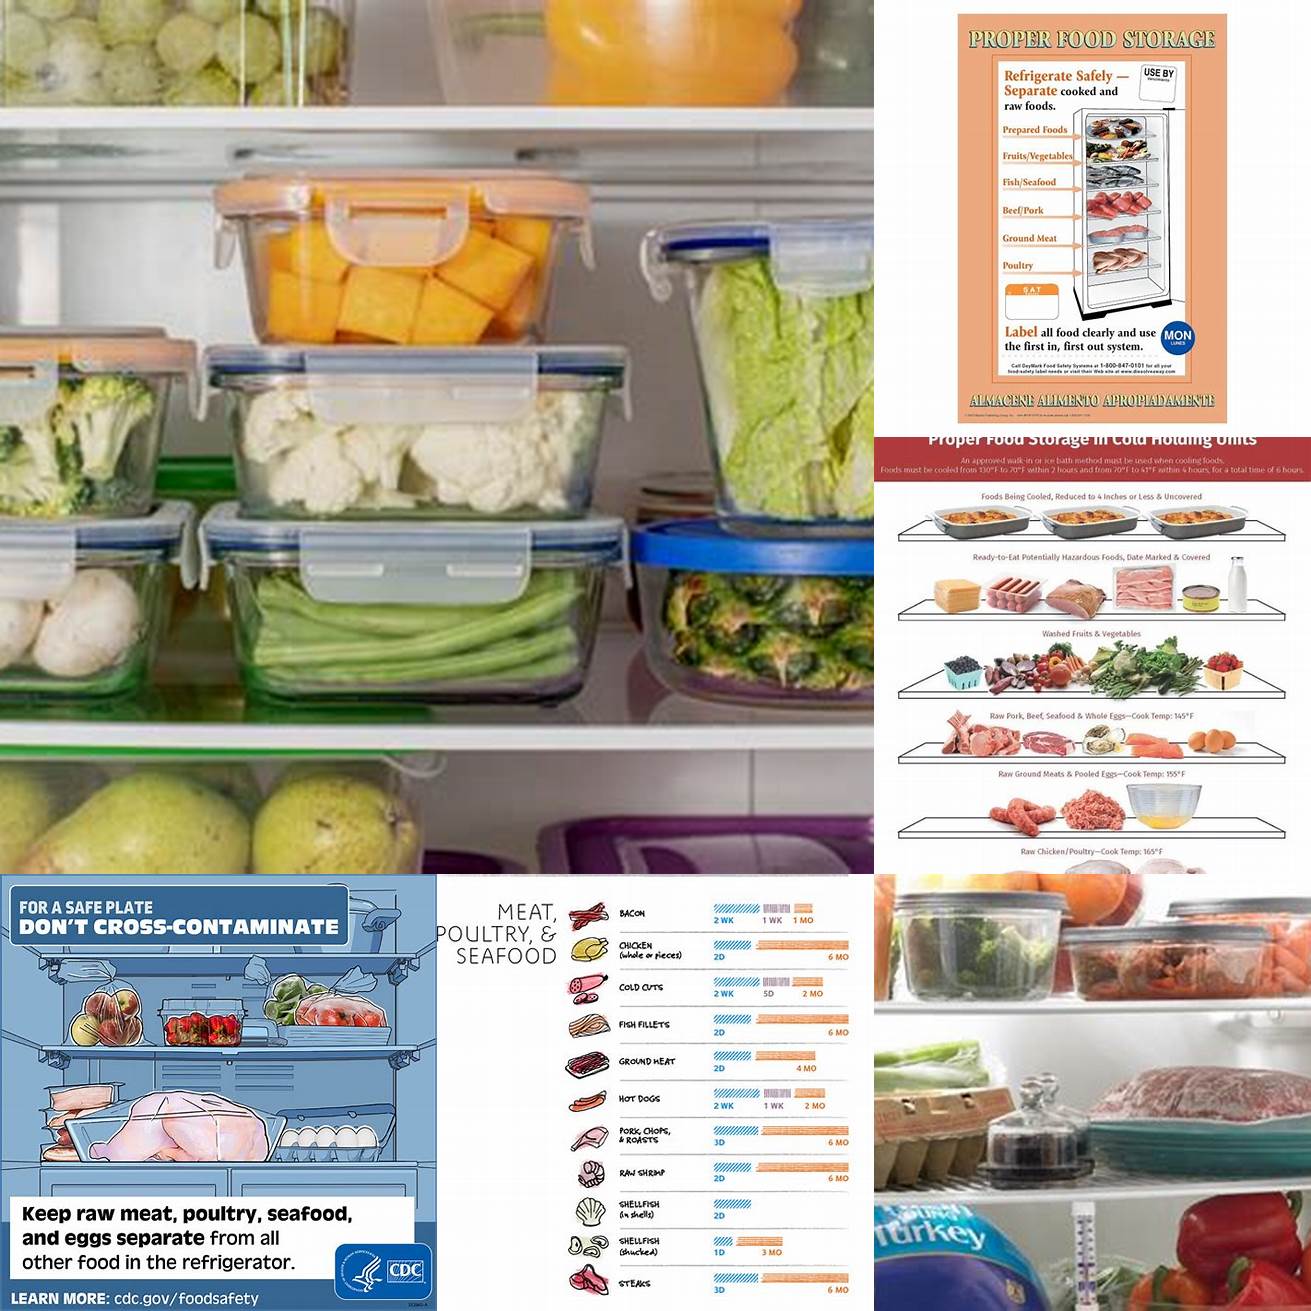 1 Proper food storage Store raw meats separately from other foods and use a first-in first-out system to ensure that older ingredients are used first